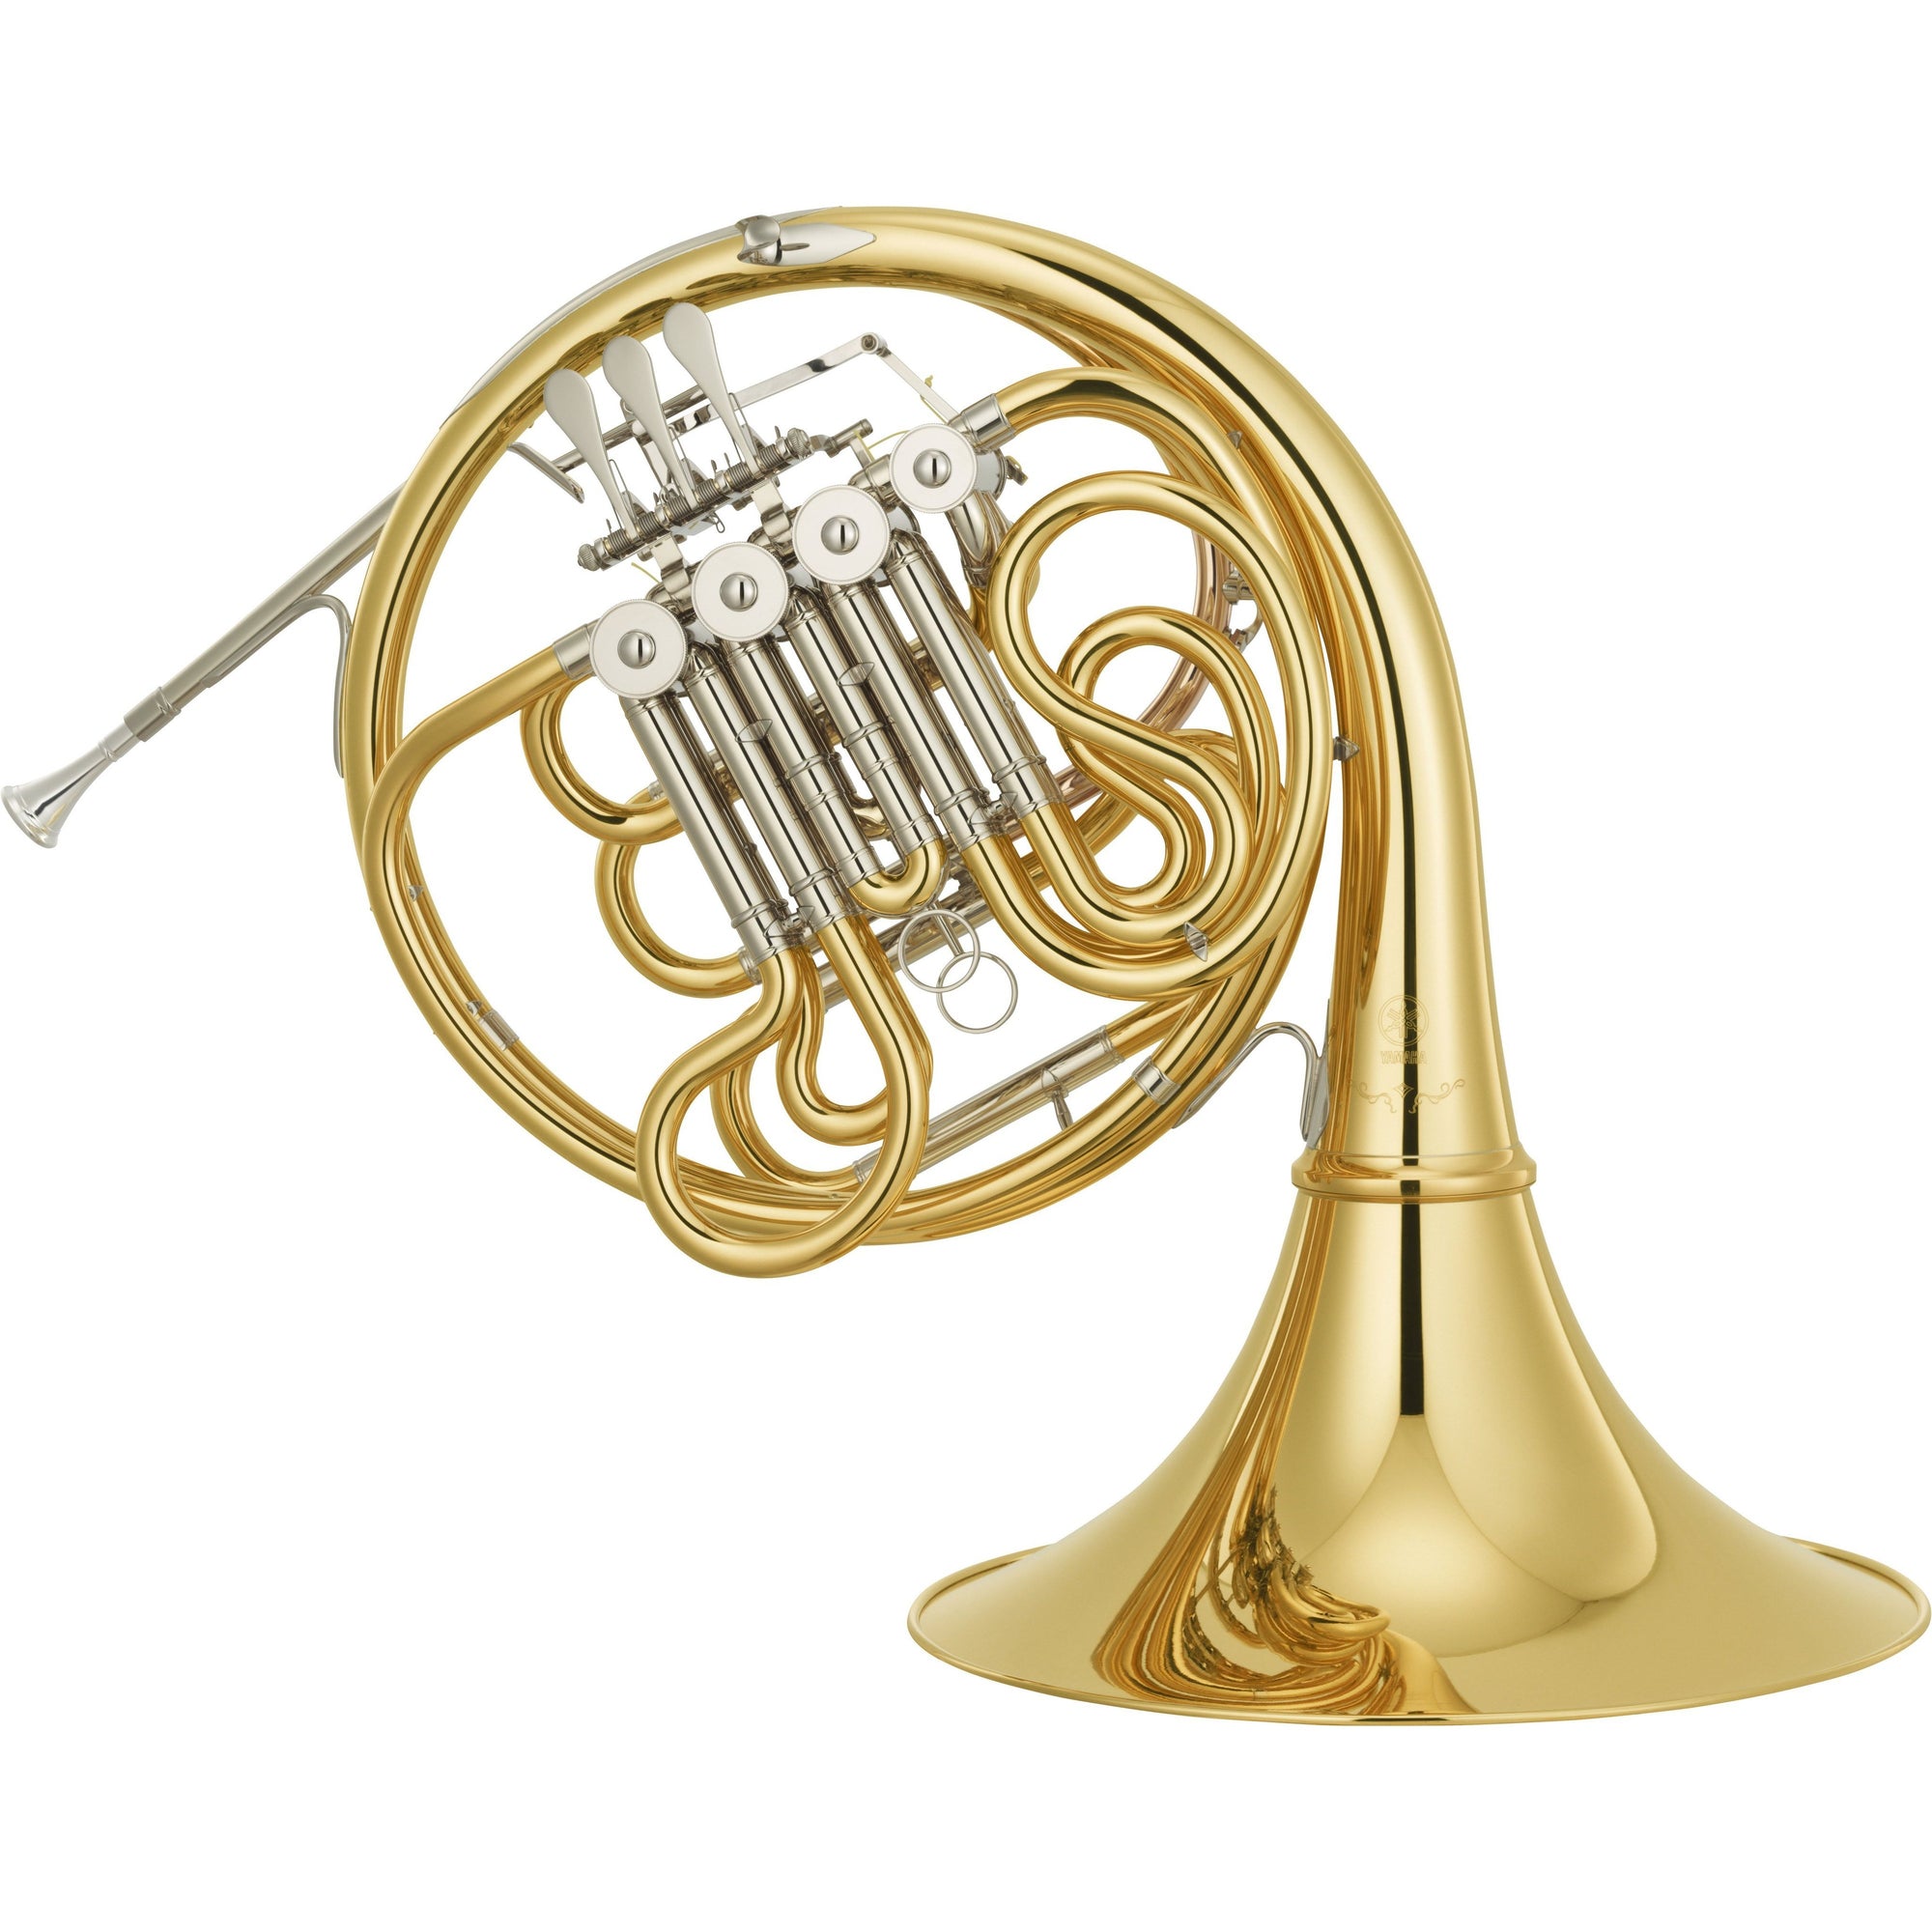 Yamaha - YHR-671D - Professional Double French Horn (with Detachable Bell)-French Horn-Yamaha-Music Elements